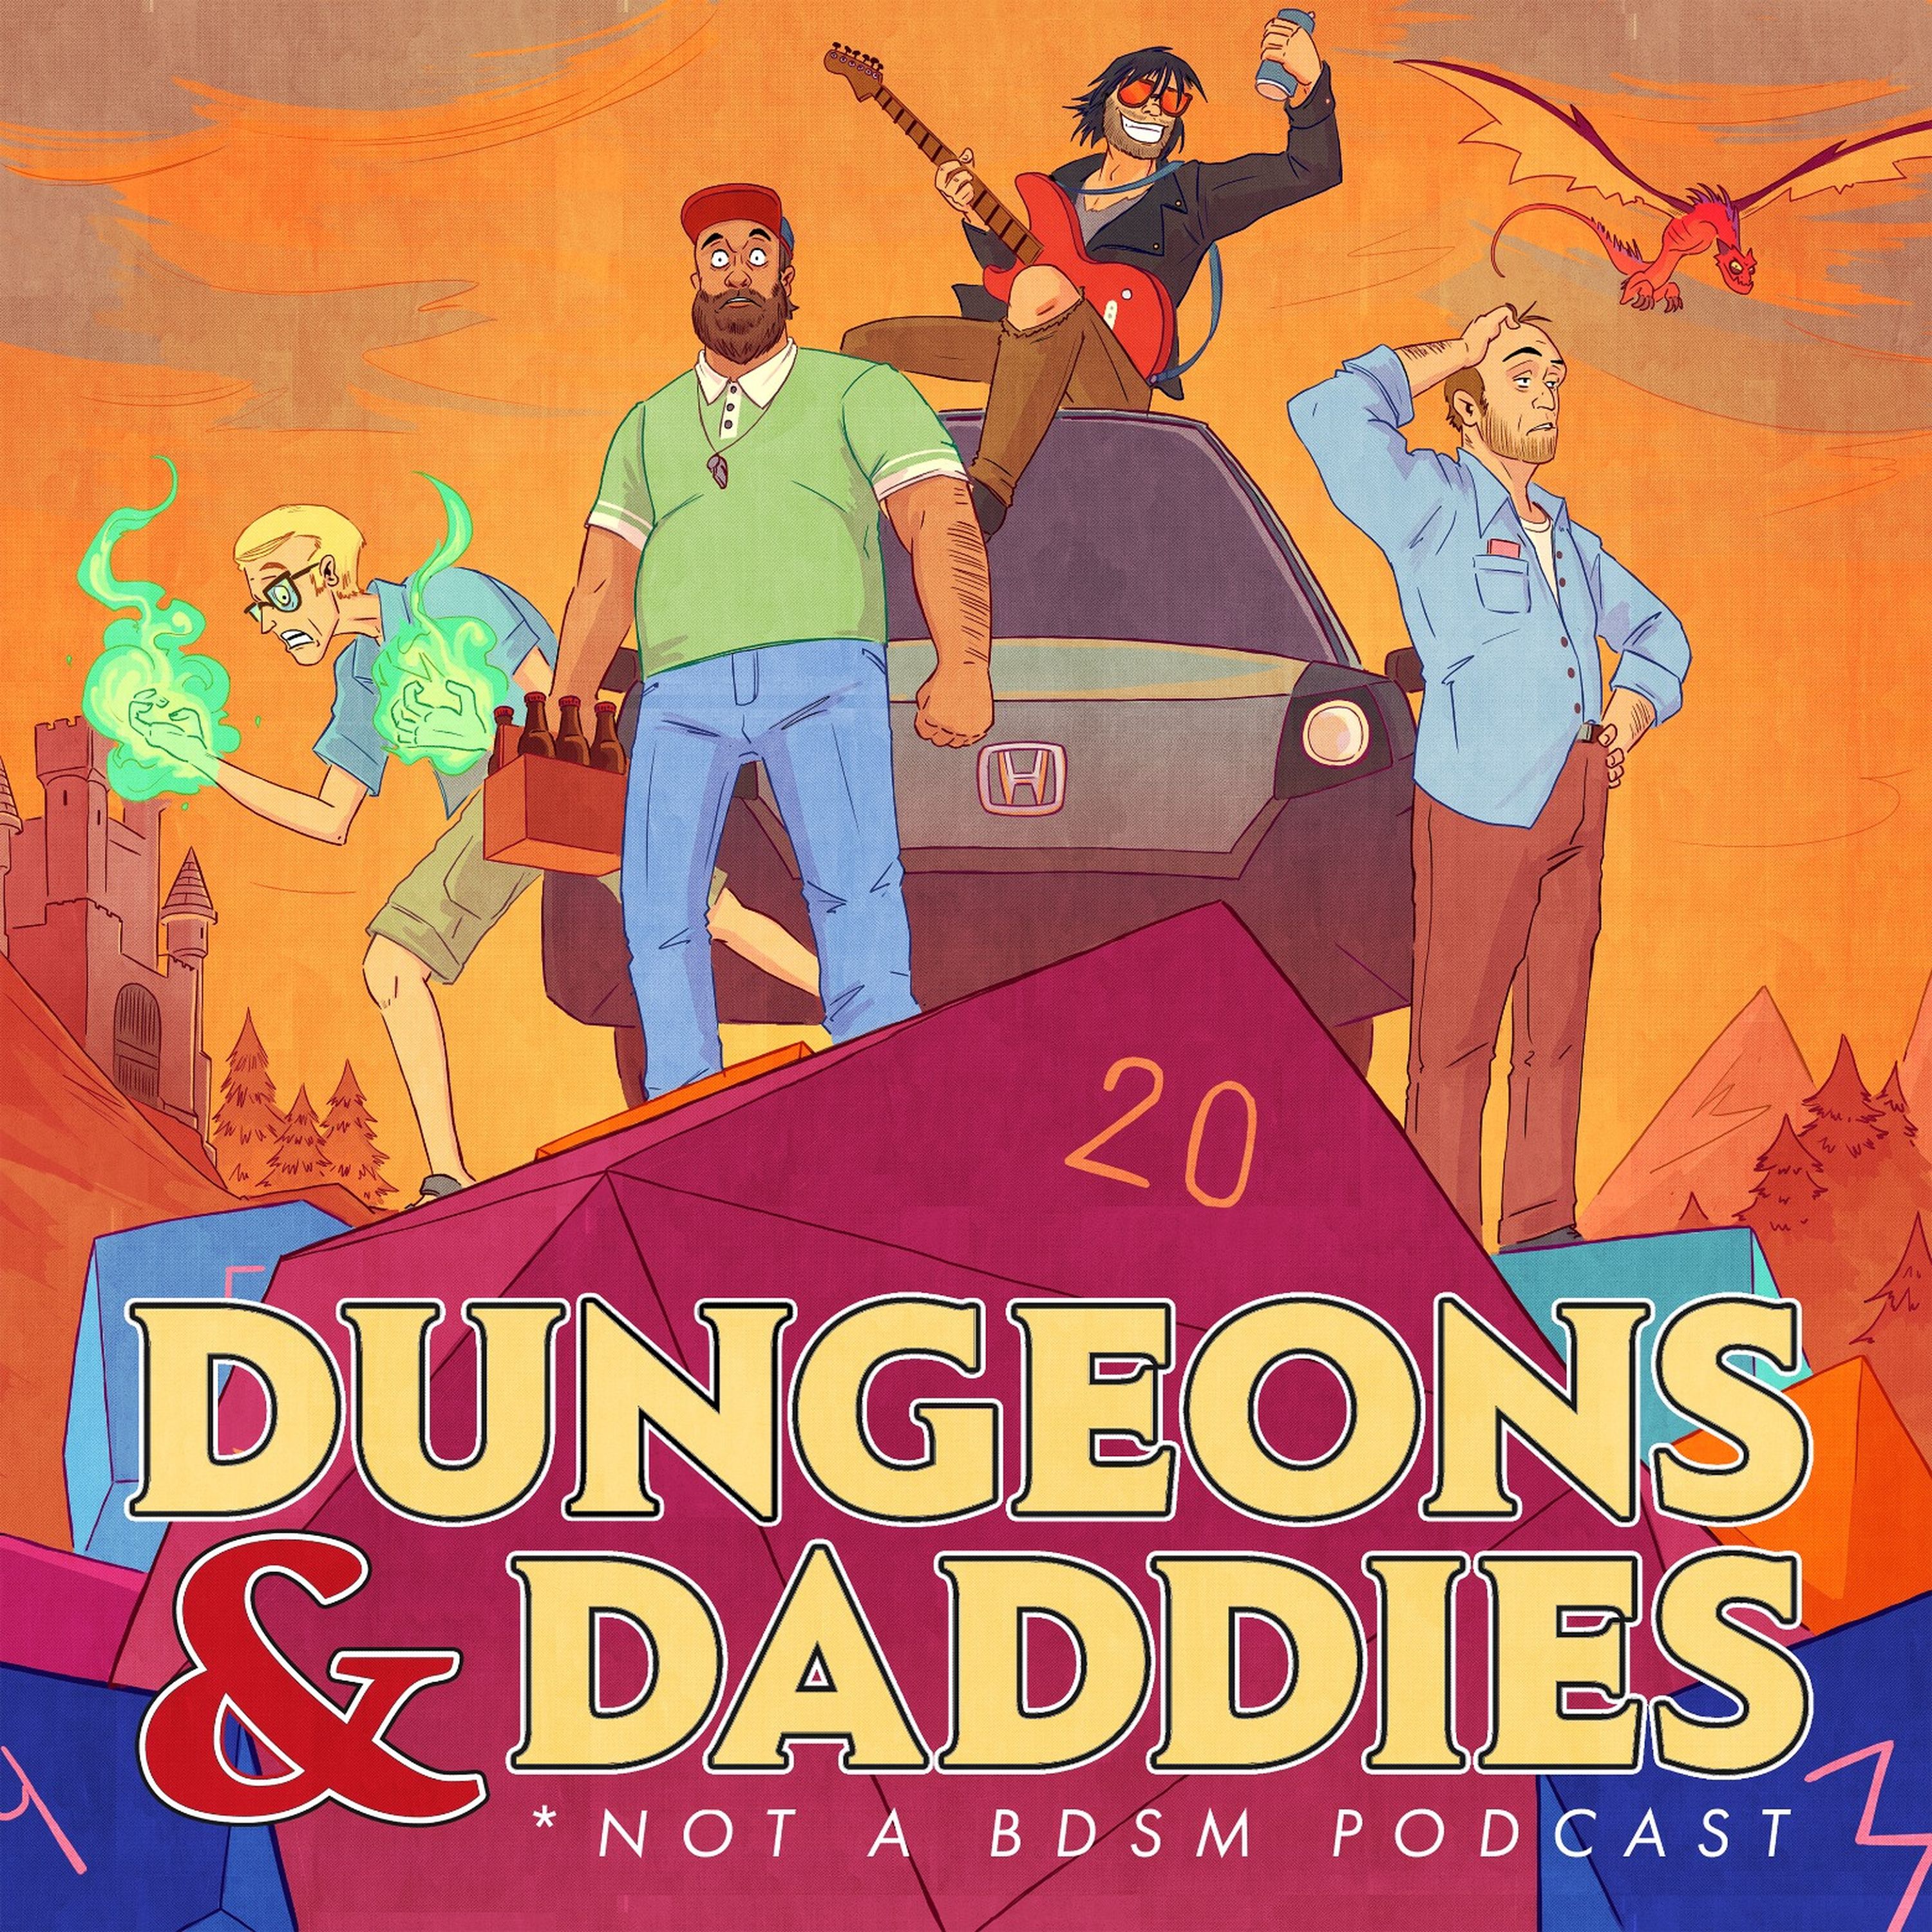 Ep. 22 - Rich Dads, Poor Dads